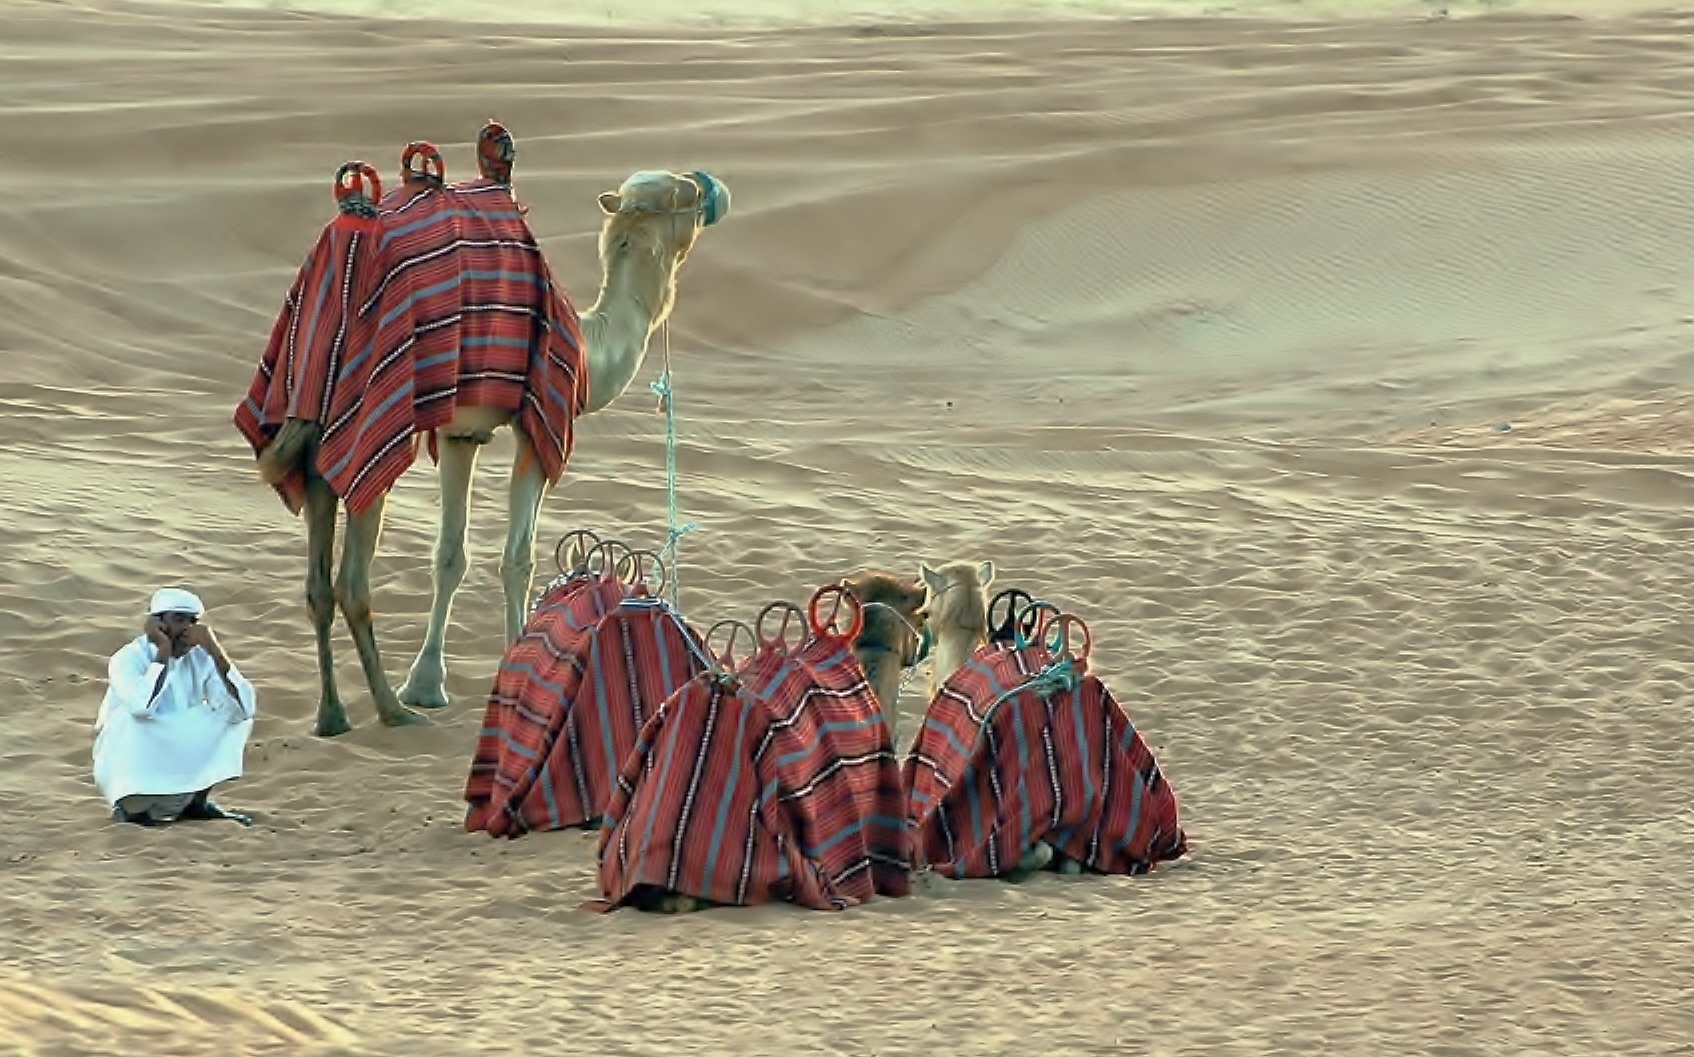 The Camel driver with the camels